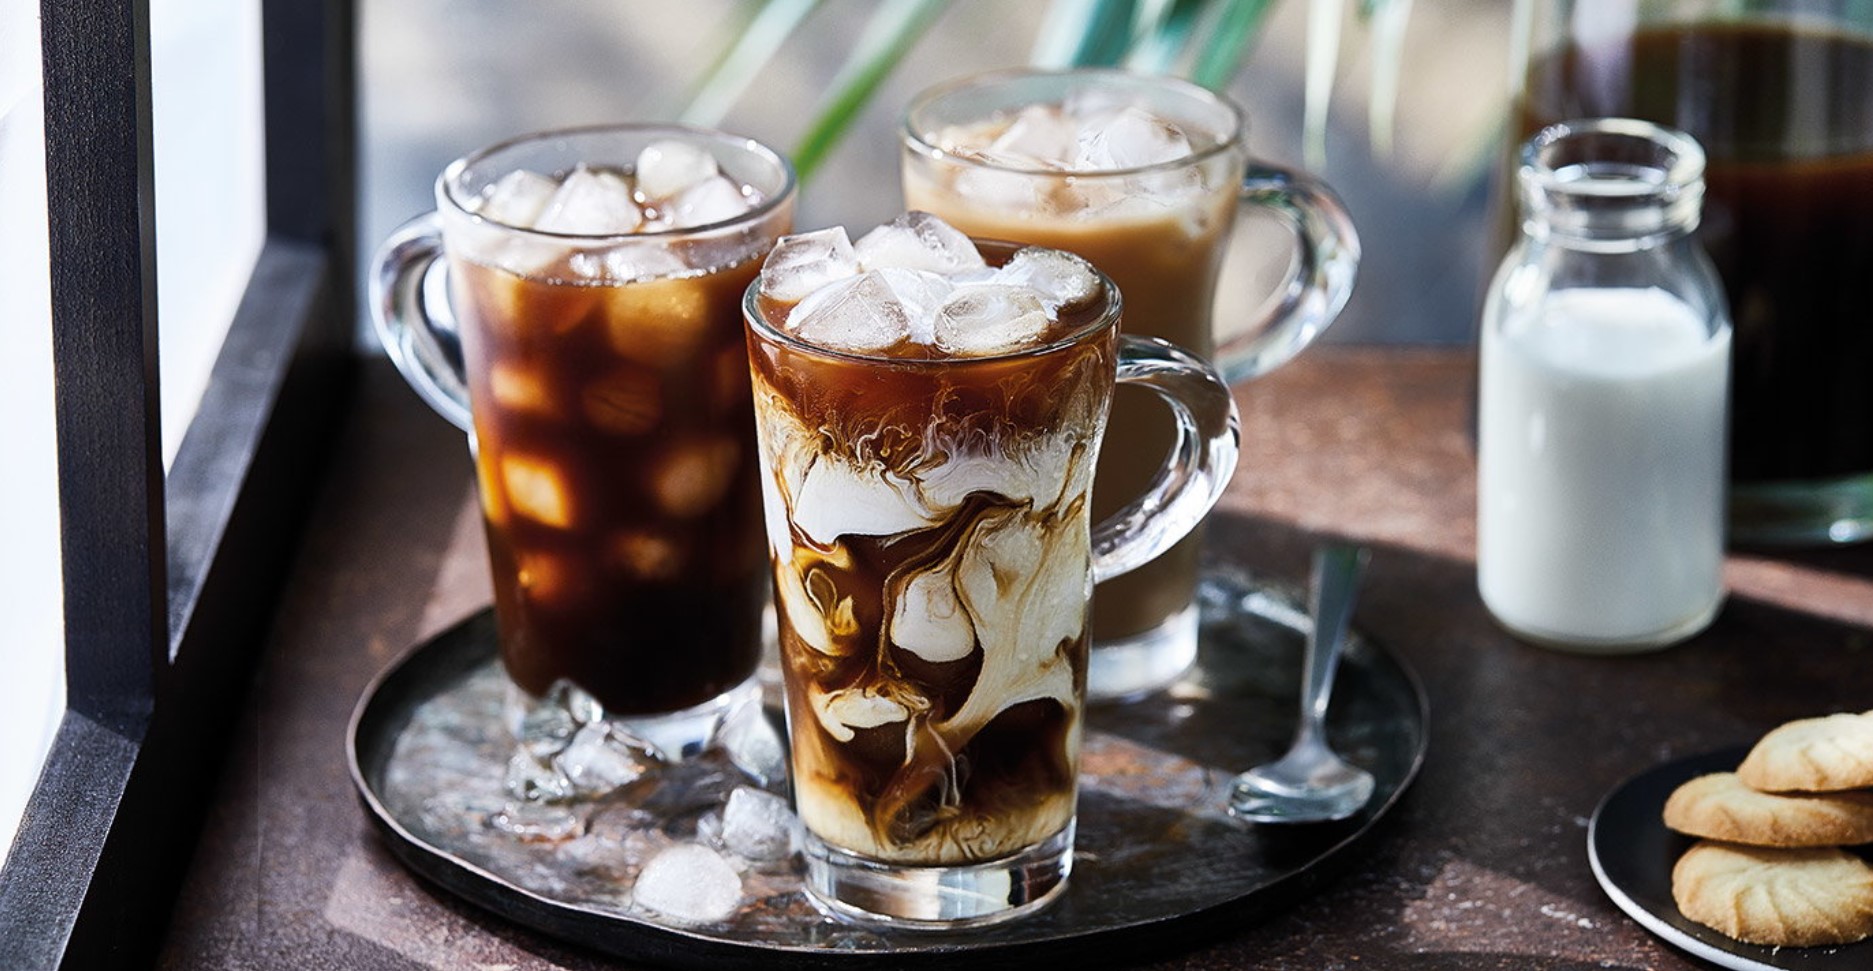 Chilled Delights: Easy and Refreshing Coffee Recipes for Home